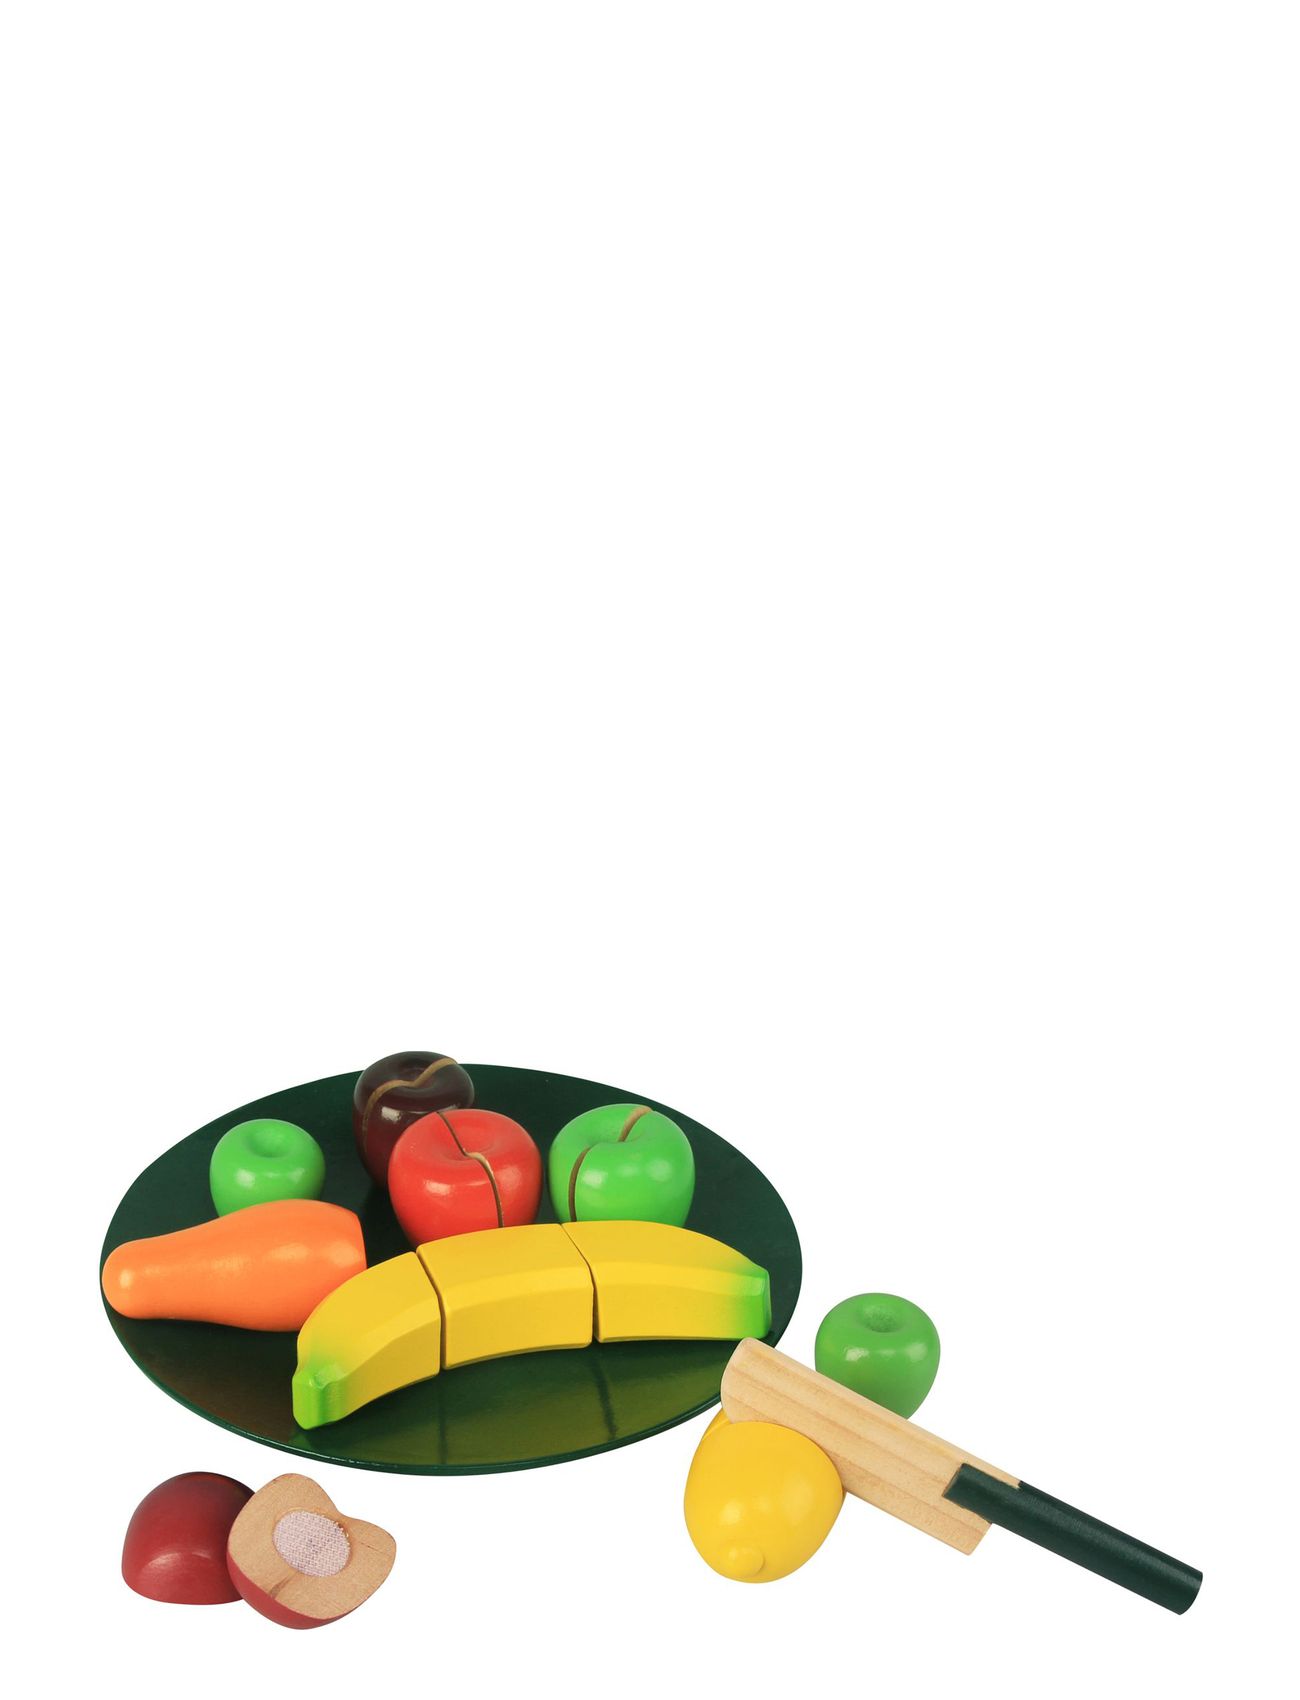 Fruit In Wood On The Plate, With Velcro Toys Toy Kitchen & Accessories Toy Food & Cakes Multi/patterned Magni Toys